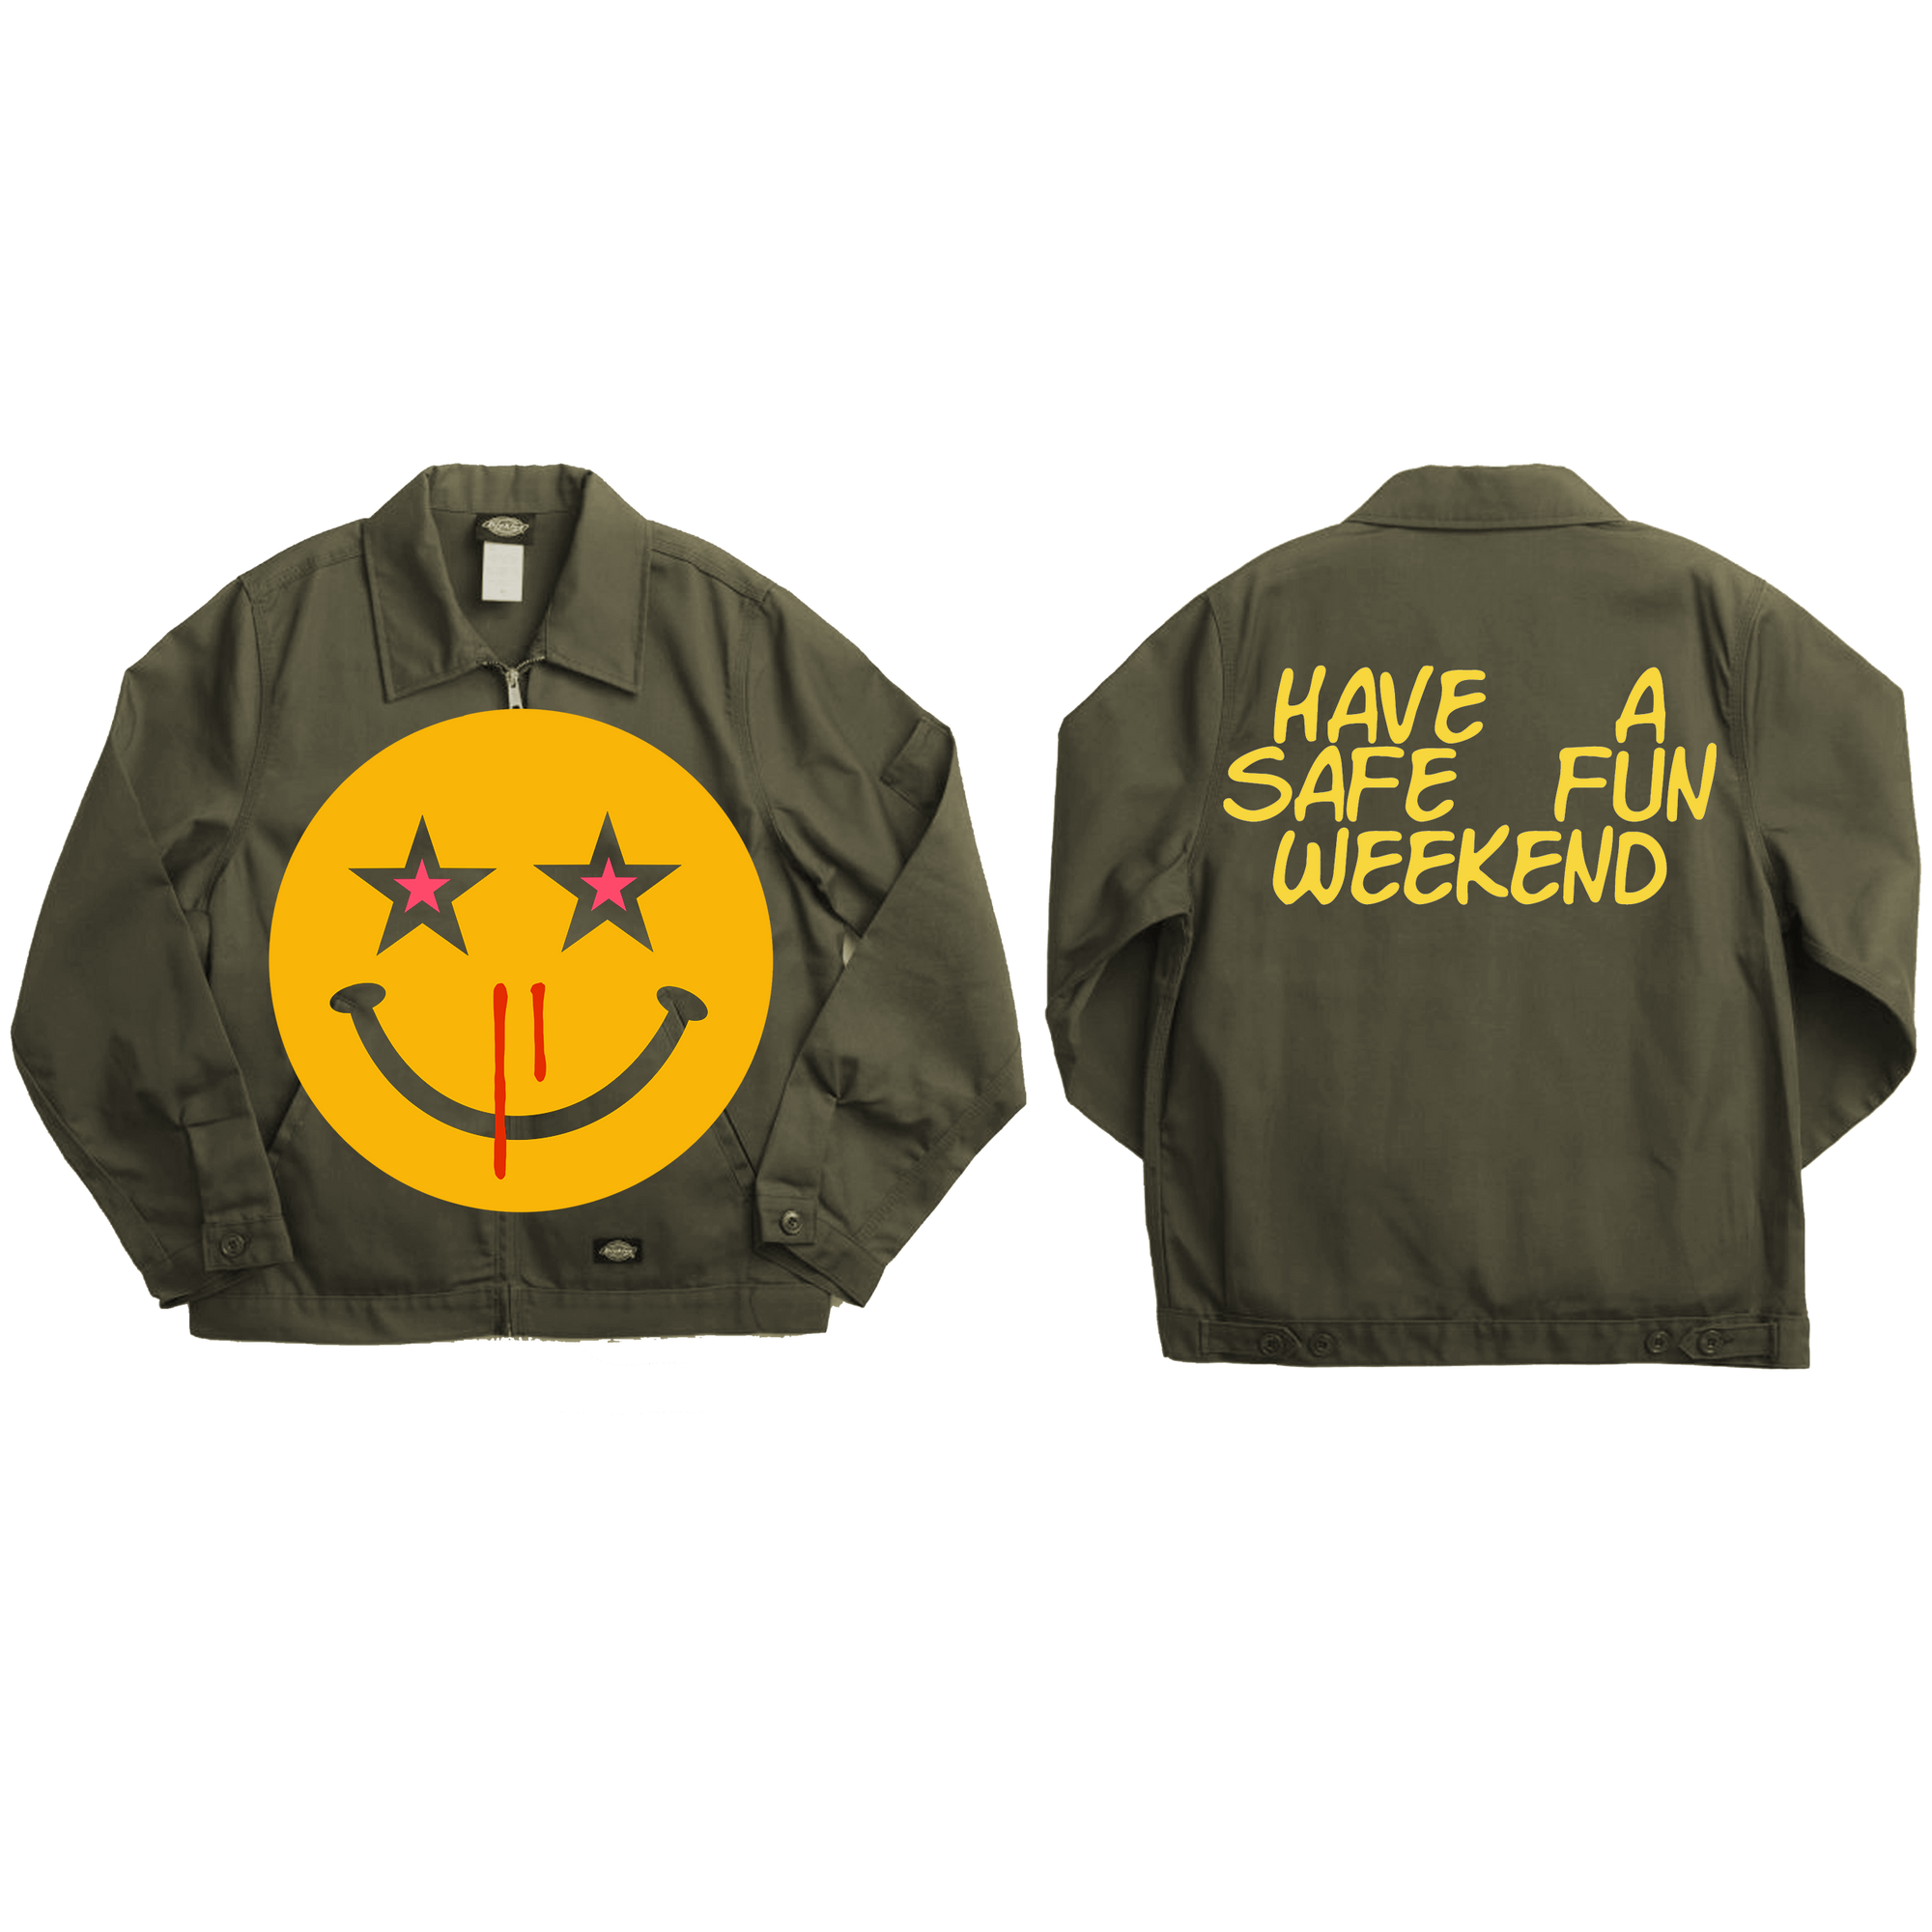 HAVE A SAFE FUN WEEKEND UTILITY JACKET - OLIVE